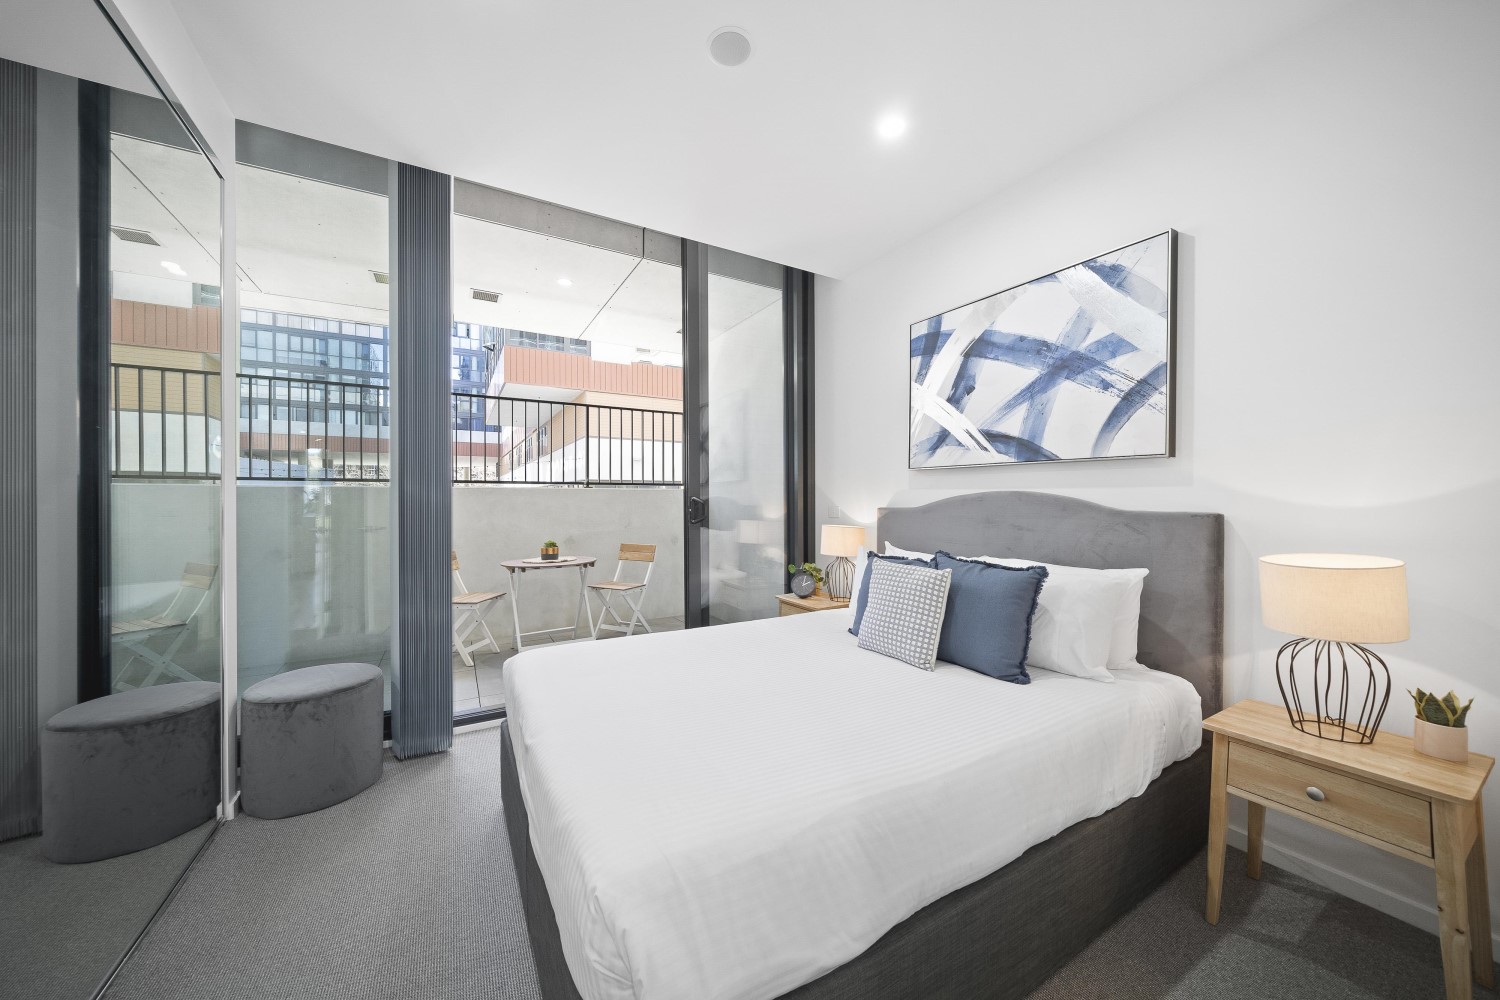 Bedroom - One Bedroom Apartment - Founders Lane Apartments - Canberra - Urban Rest